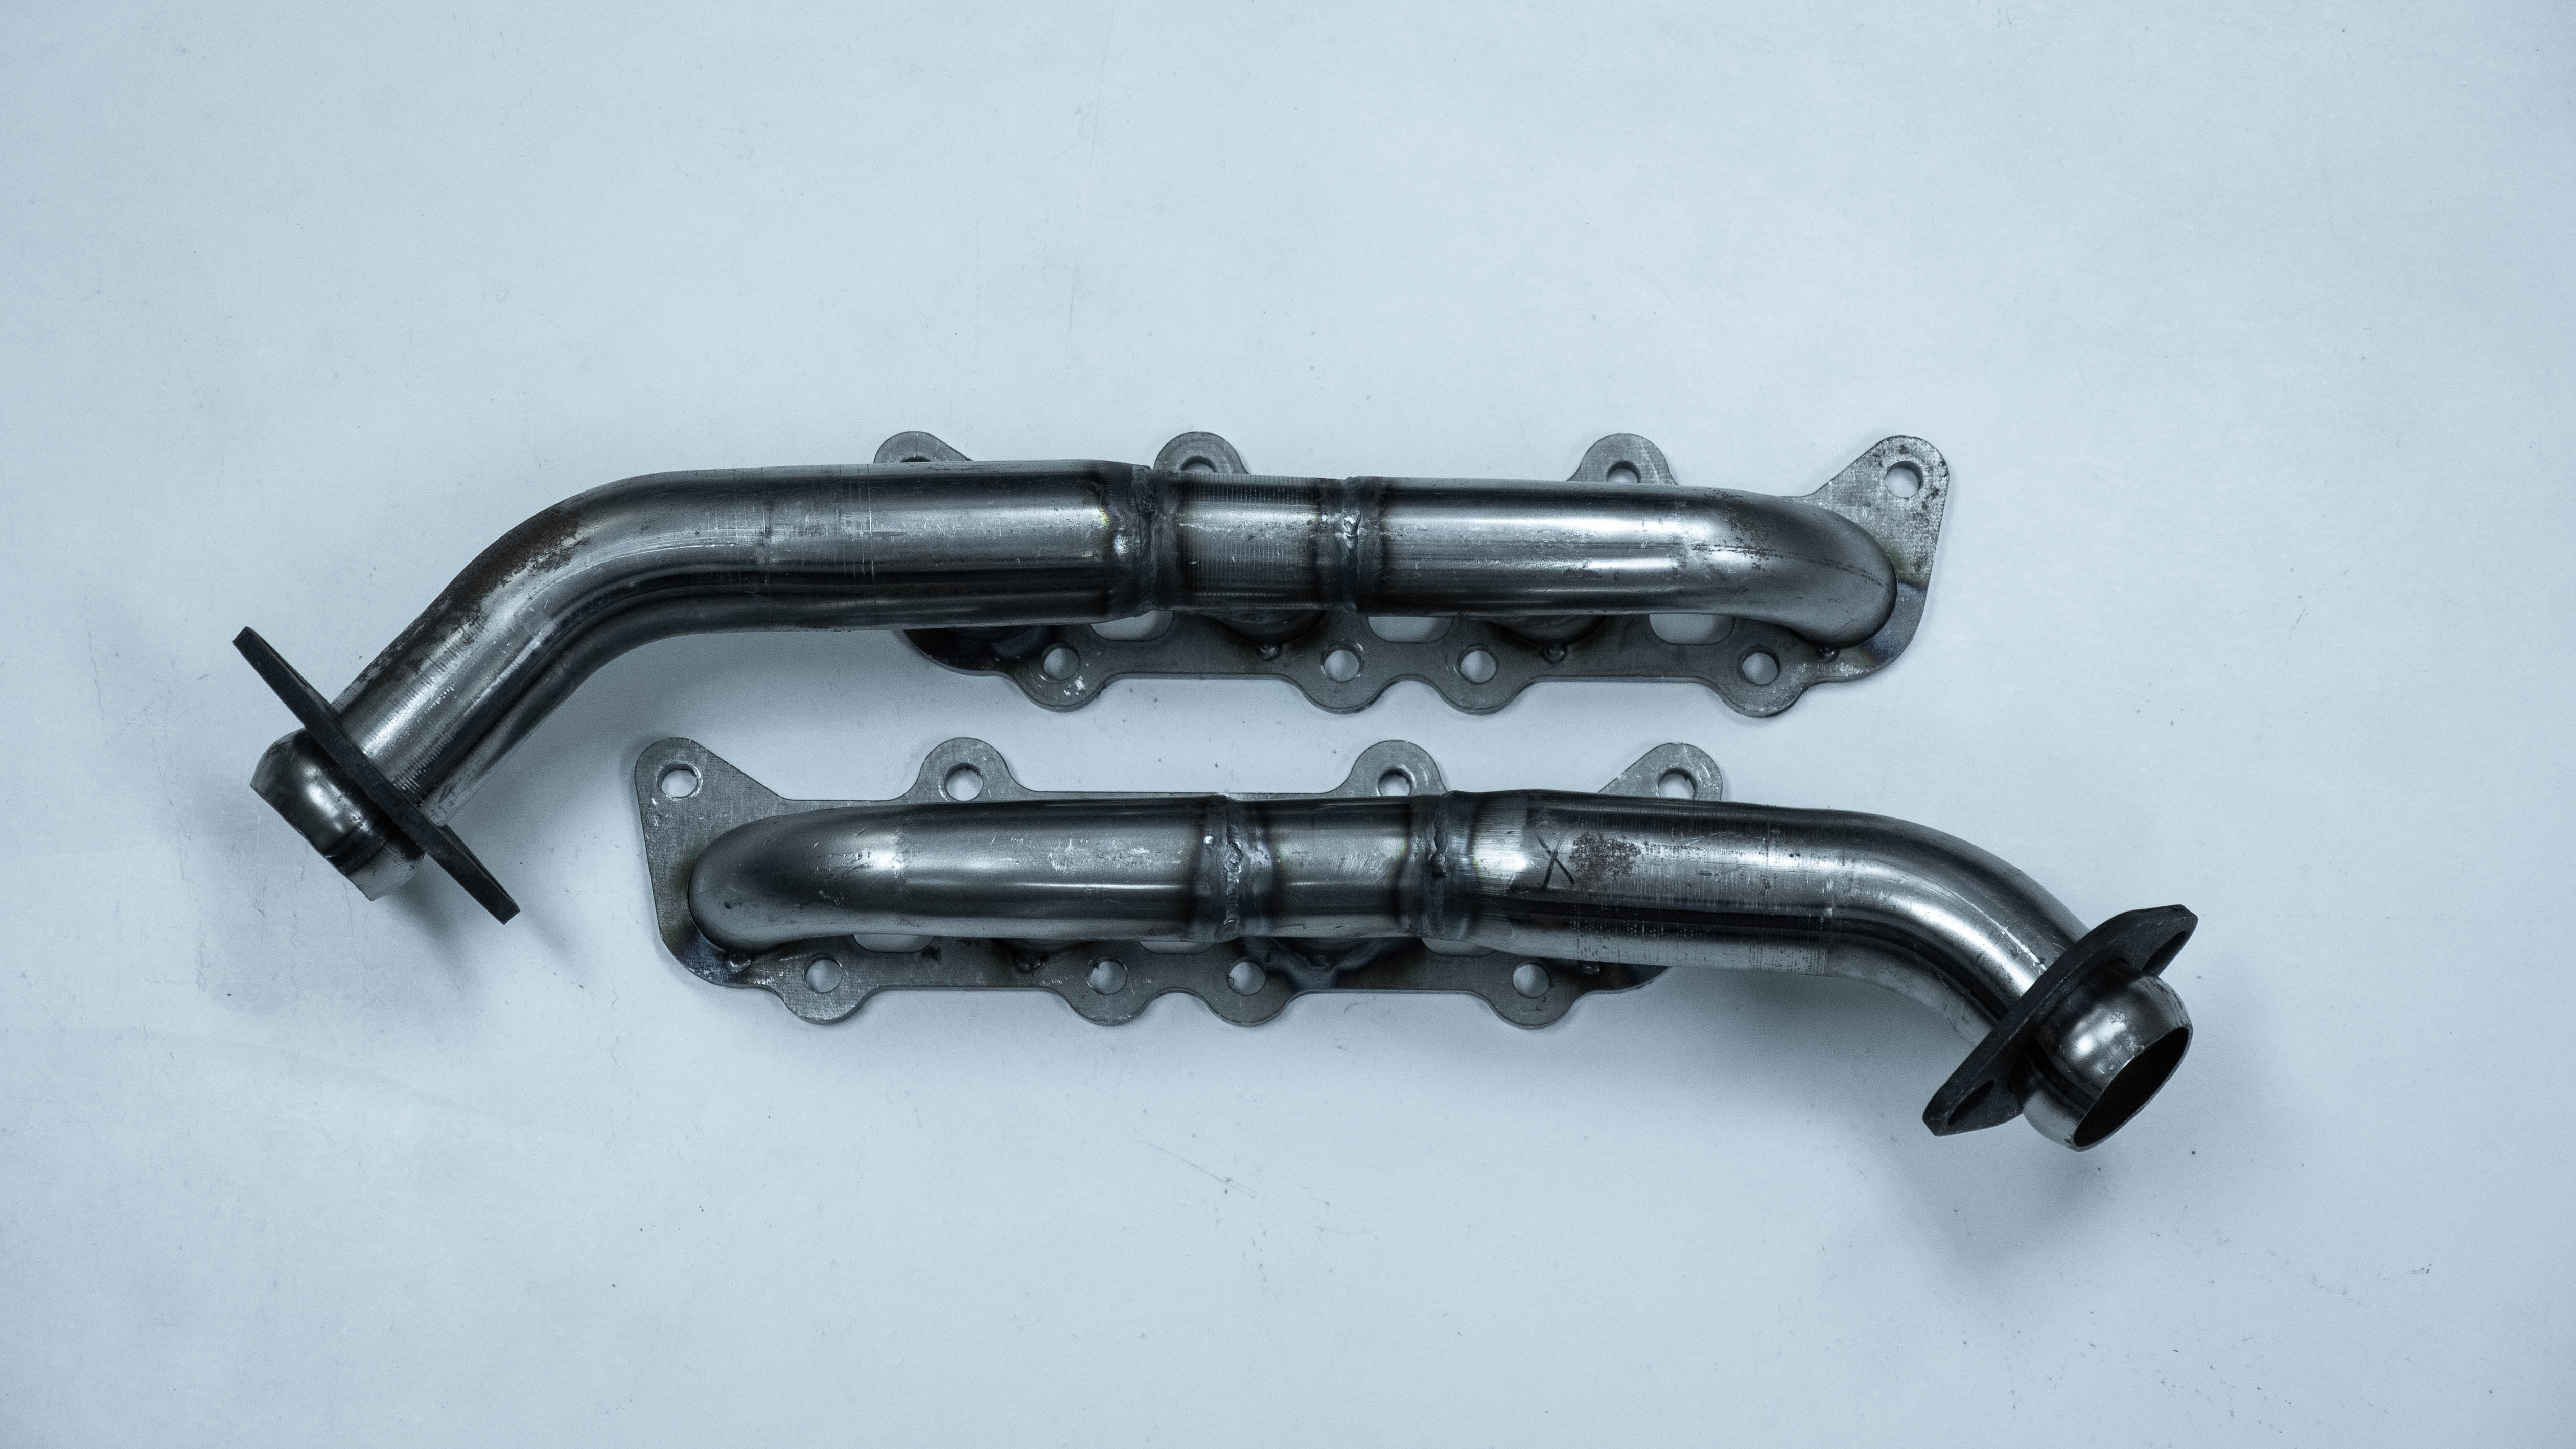 Image for product coyote-5.0l-headers-for-early-bronco-bare-metal-w-gaskets